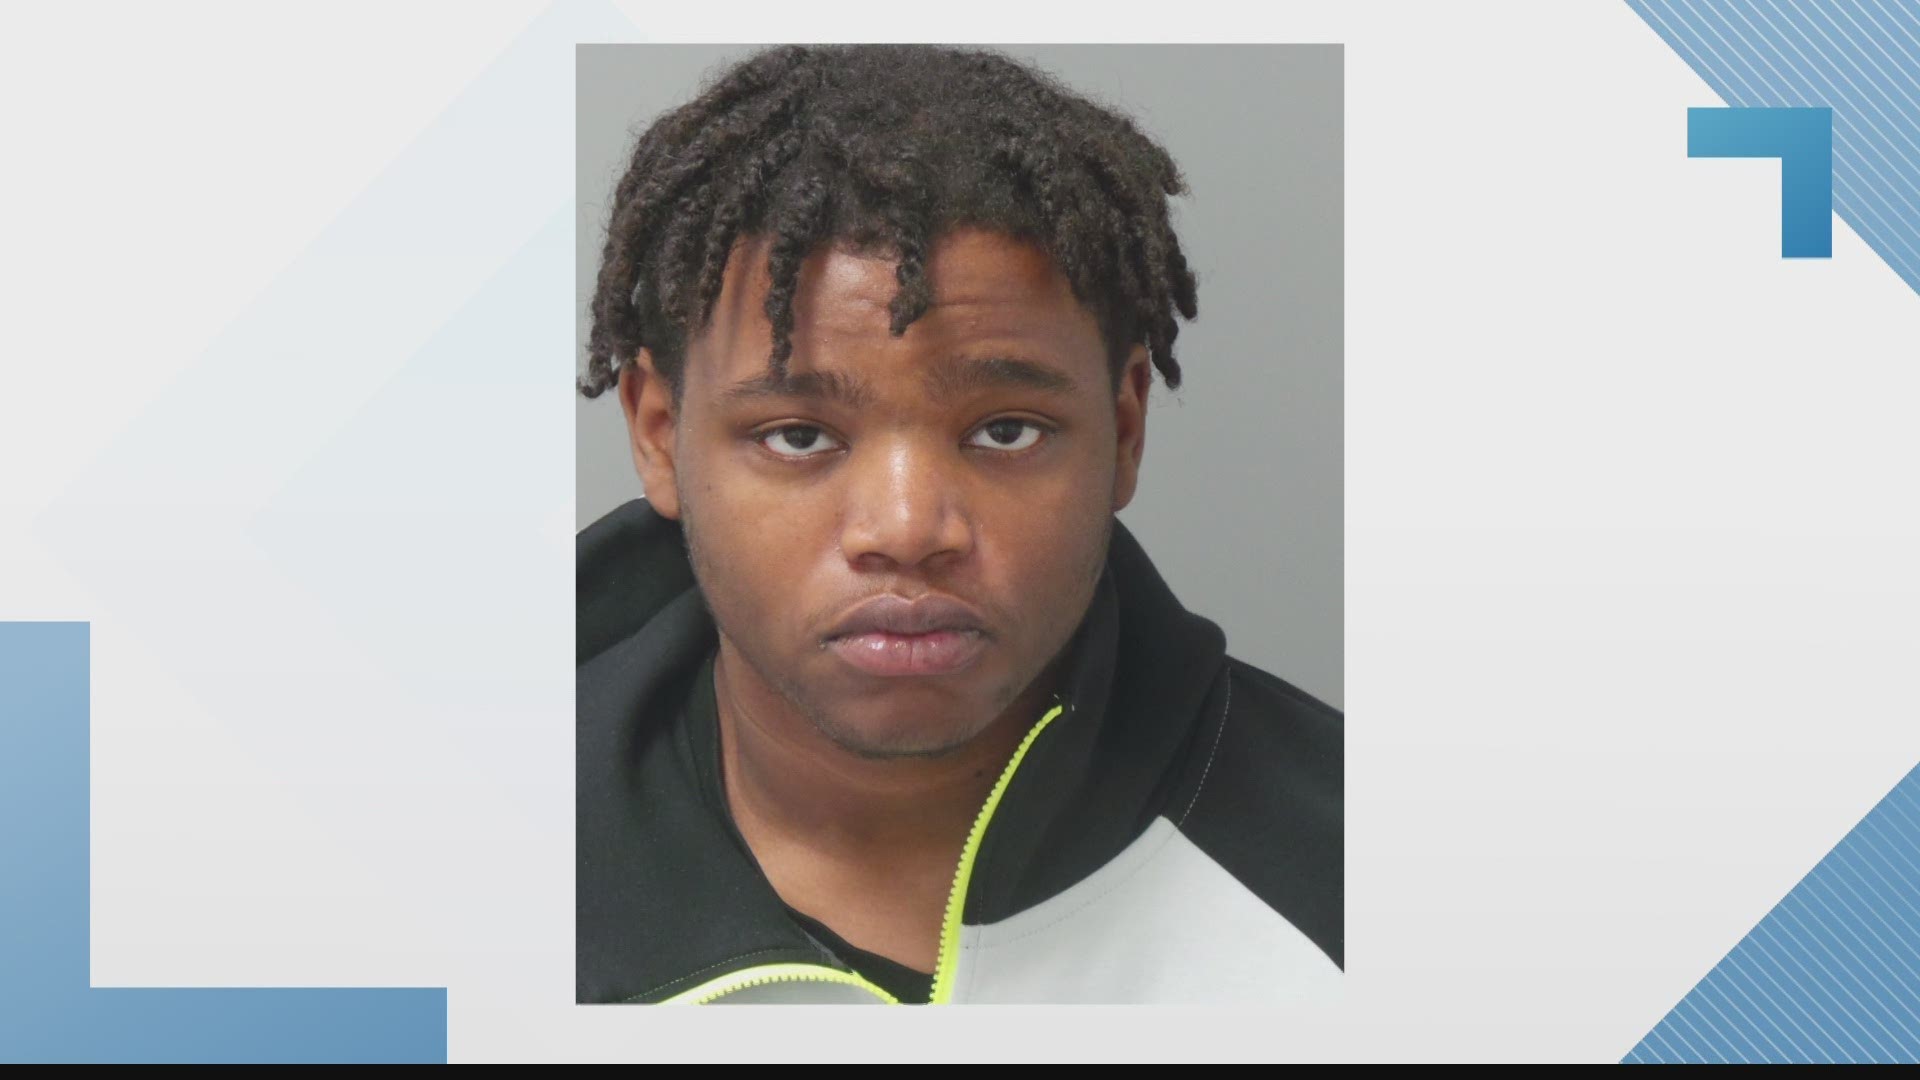 Kyri Morgan of St. Louis has been charged with second-degree burglary. His bond was set at $10,000